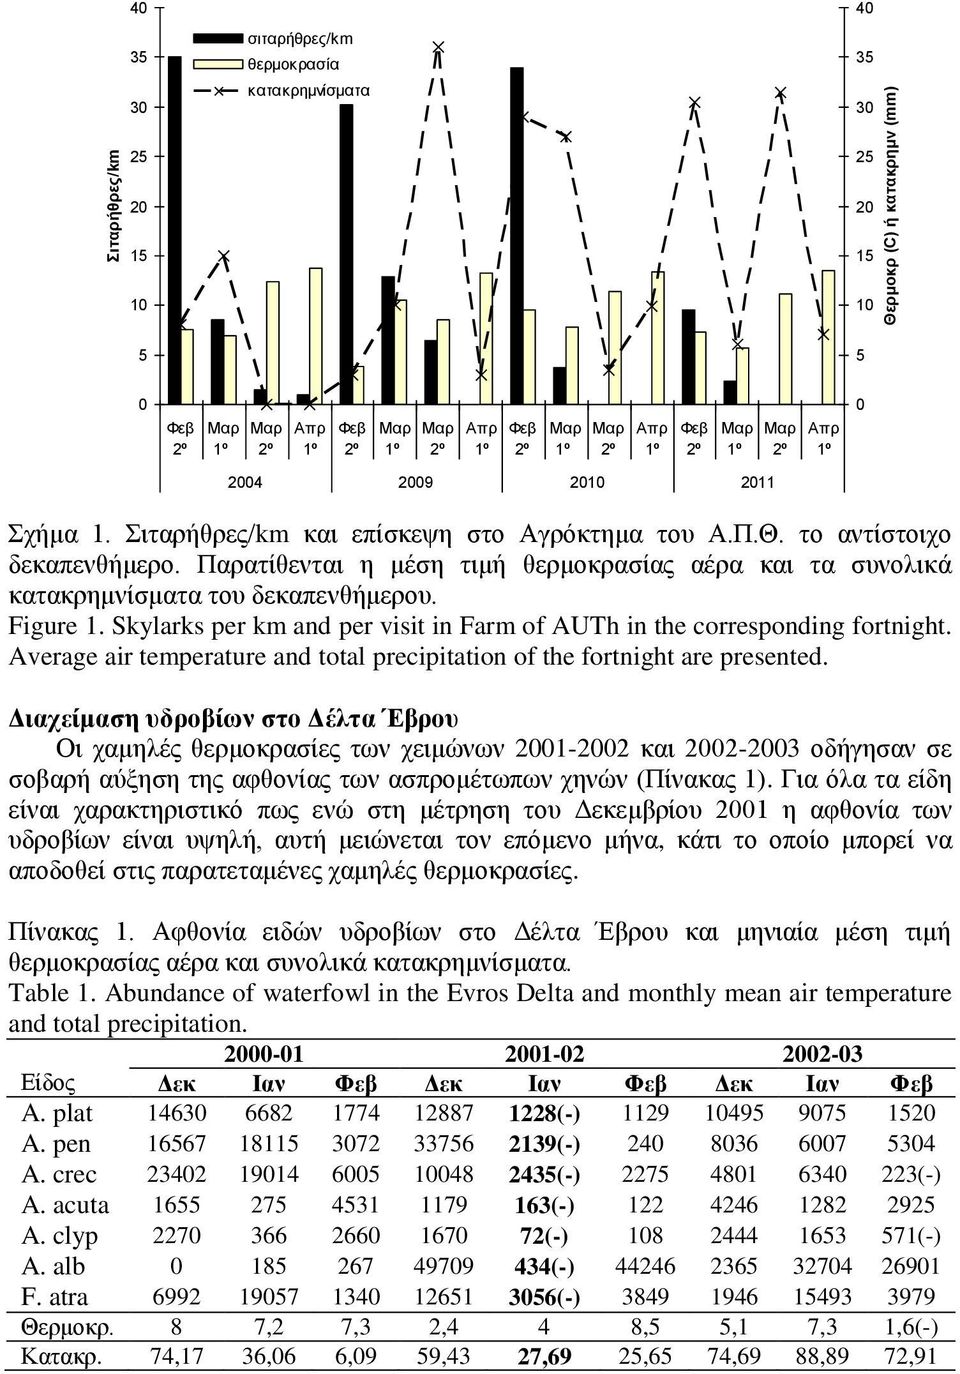 Skylarks per km and per visit in Farm of AUTh in the corresponding fortnight. Average air temperature and total precipitation of the fortnight are presented.